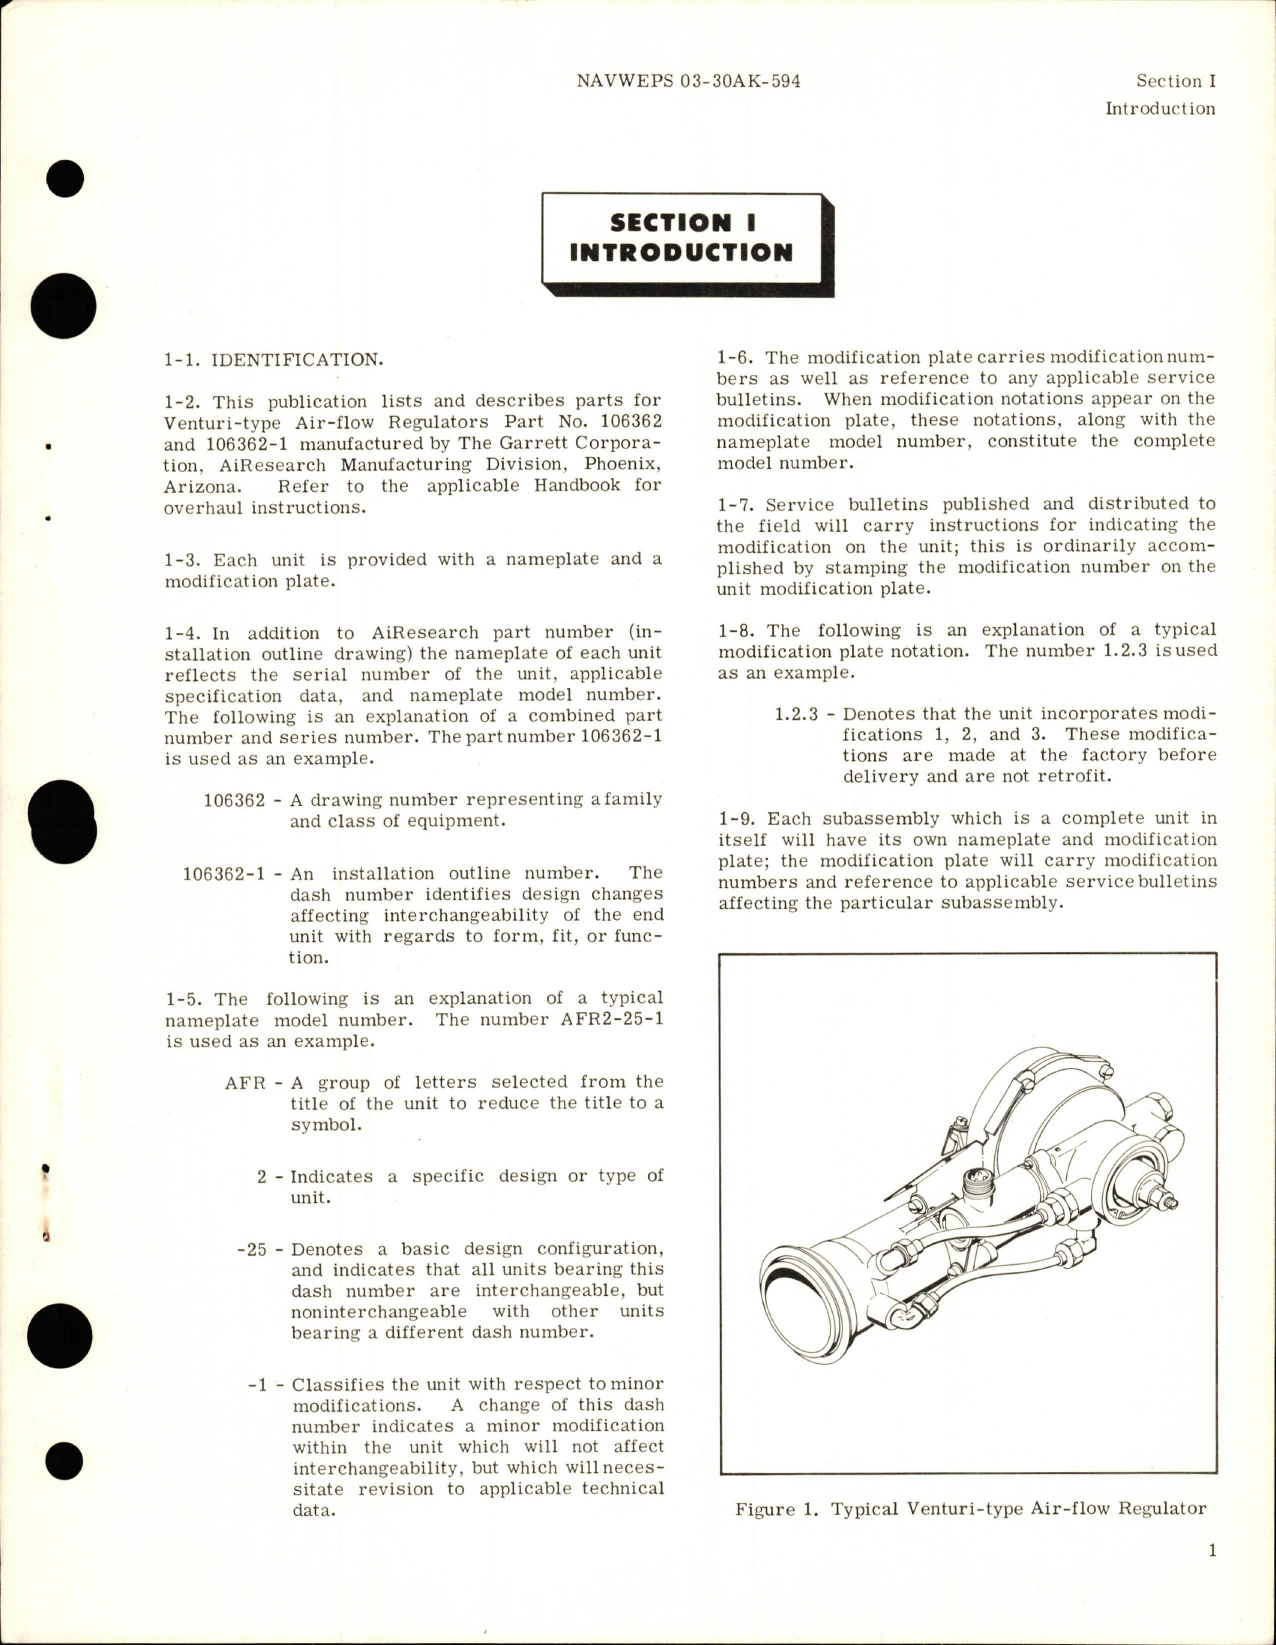 Sample page 5 from AirCorps Library document: Illustrated Parts Breakdown for Venturi-Type Air-Flow Regulators - Parts 106362 and 106362-1